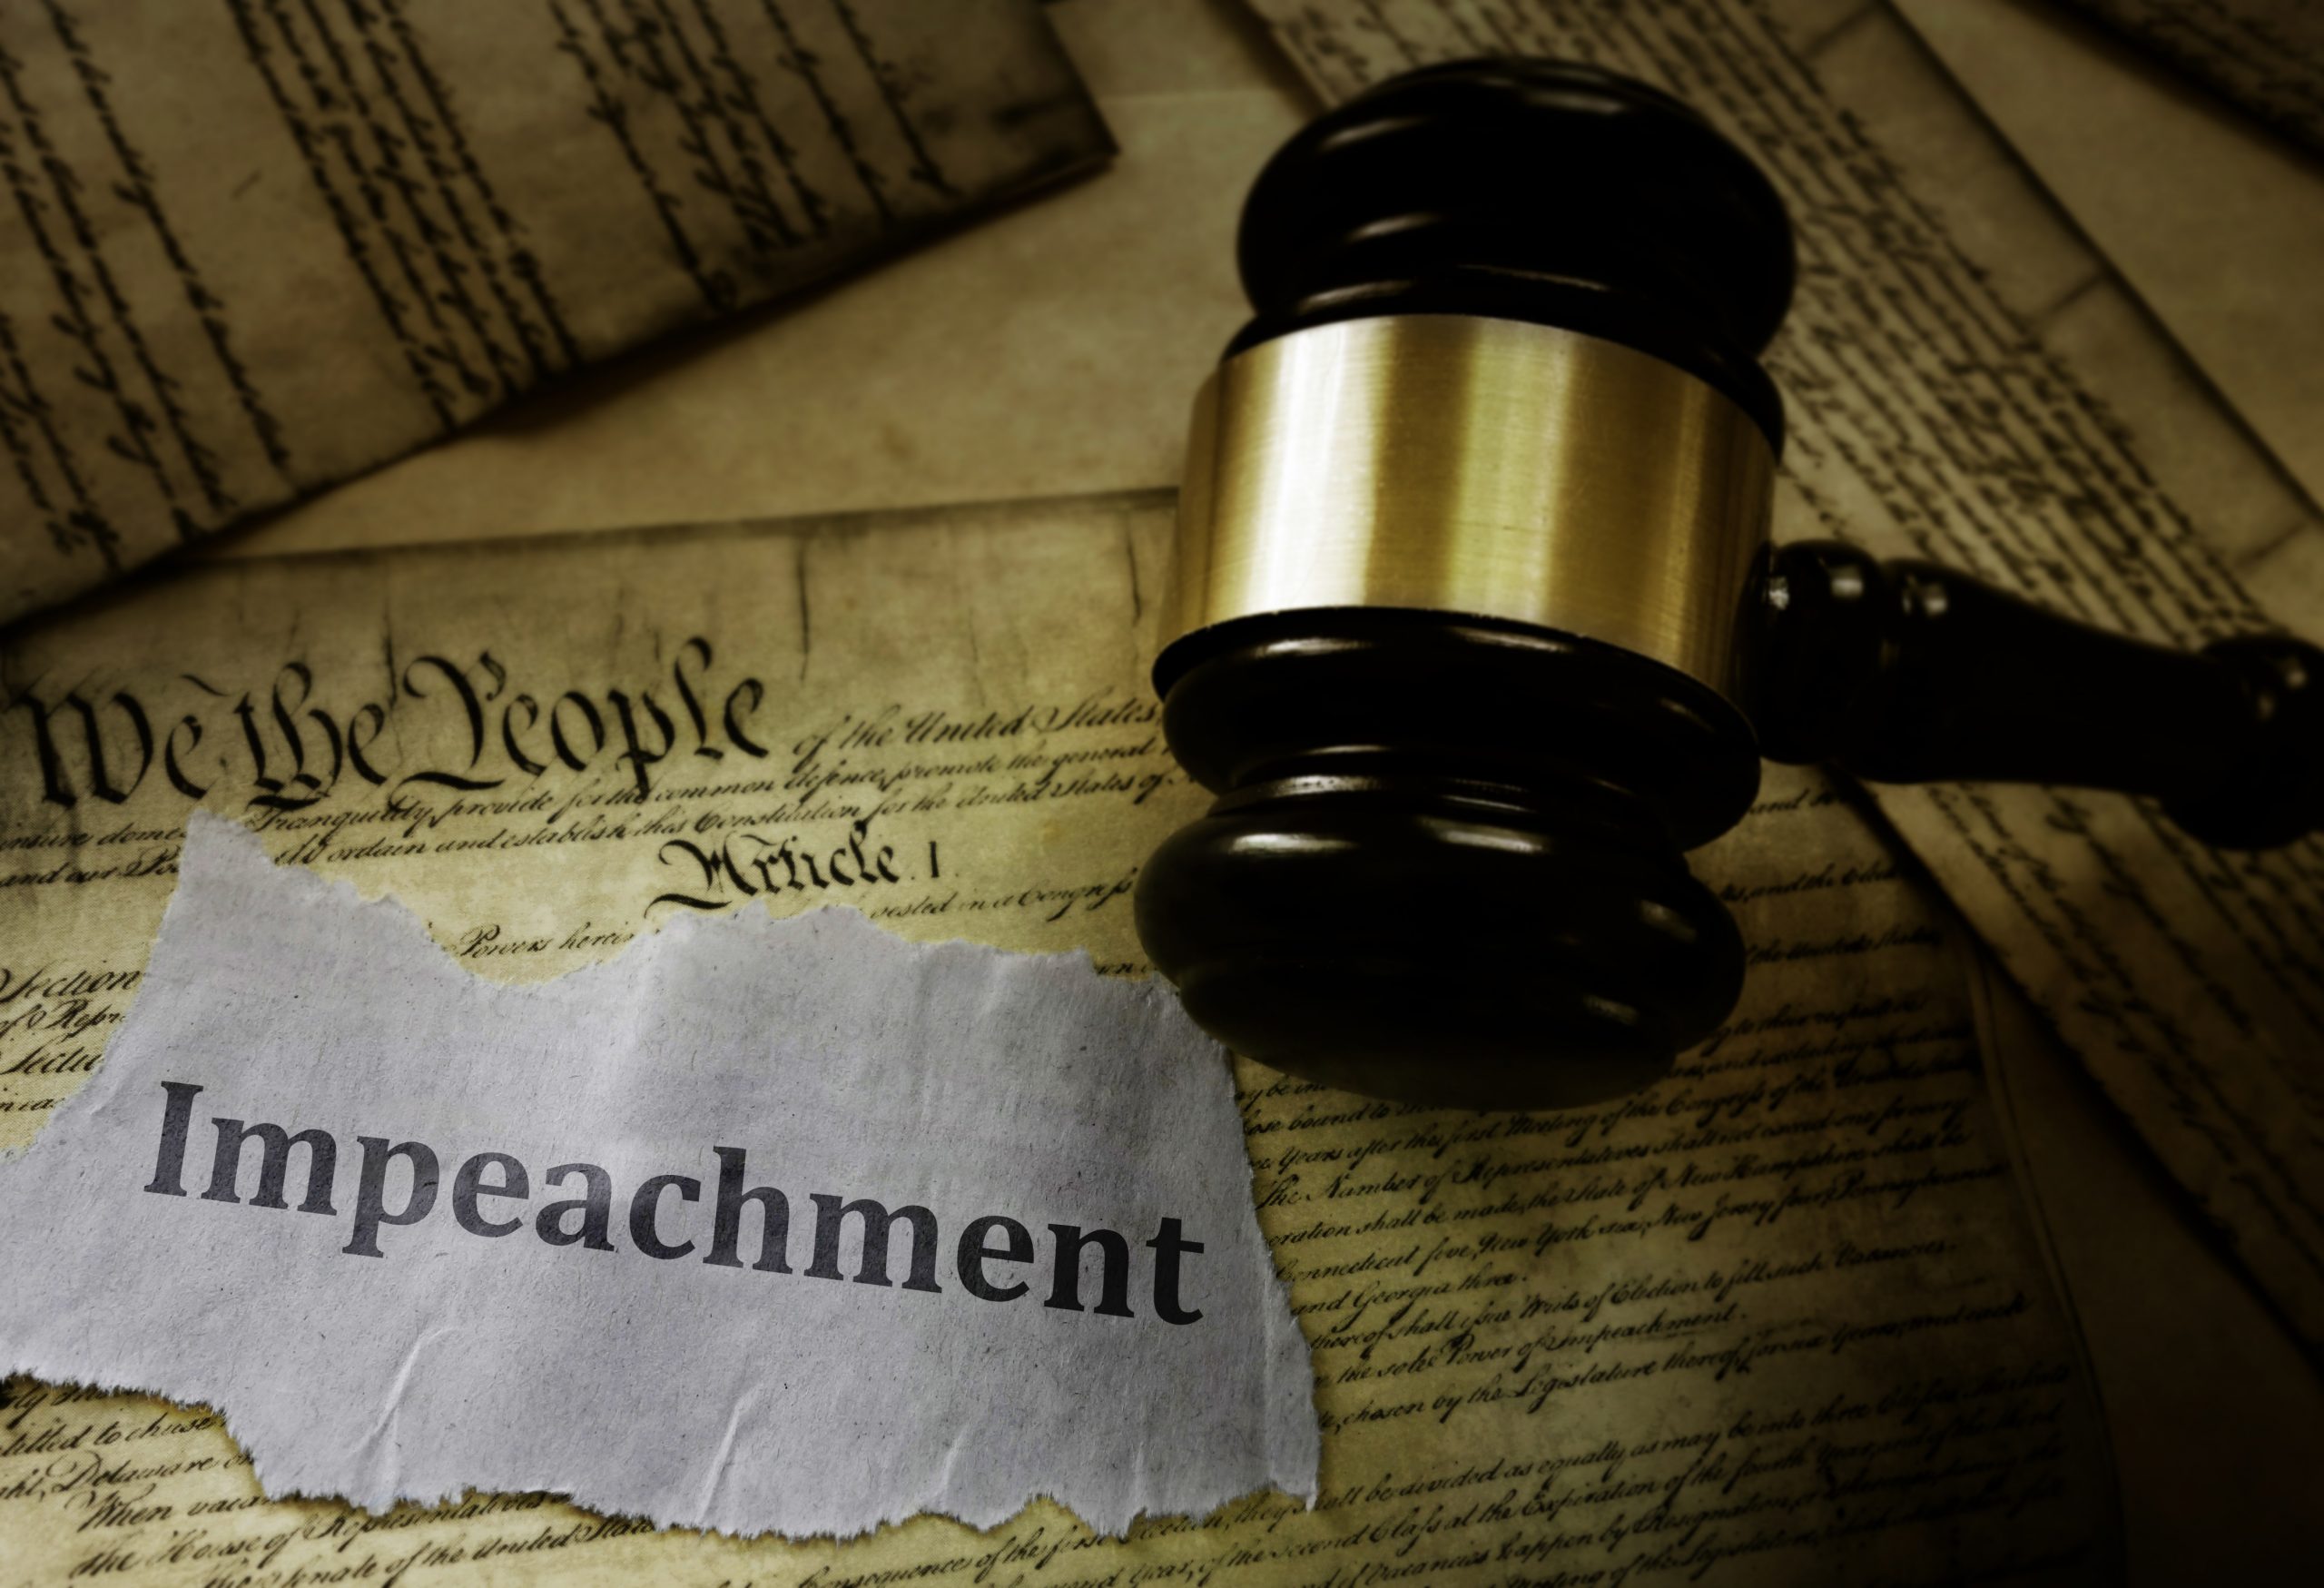 The House considers impeachment: Where do we go from here?